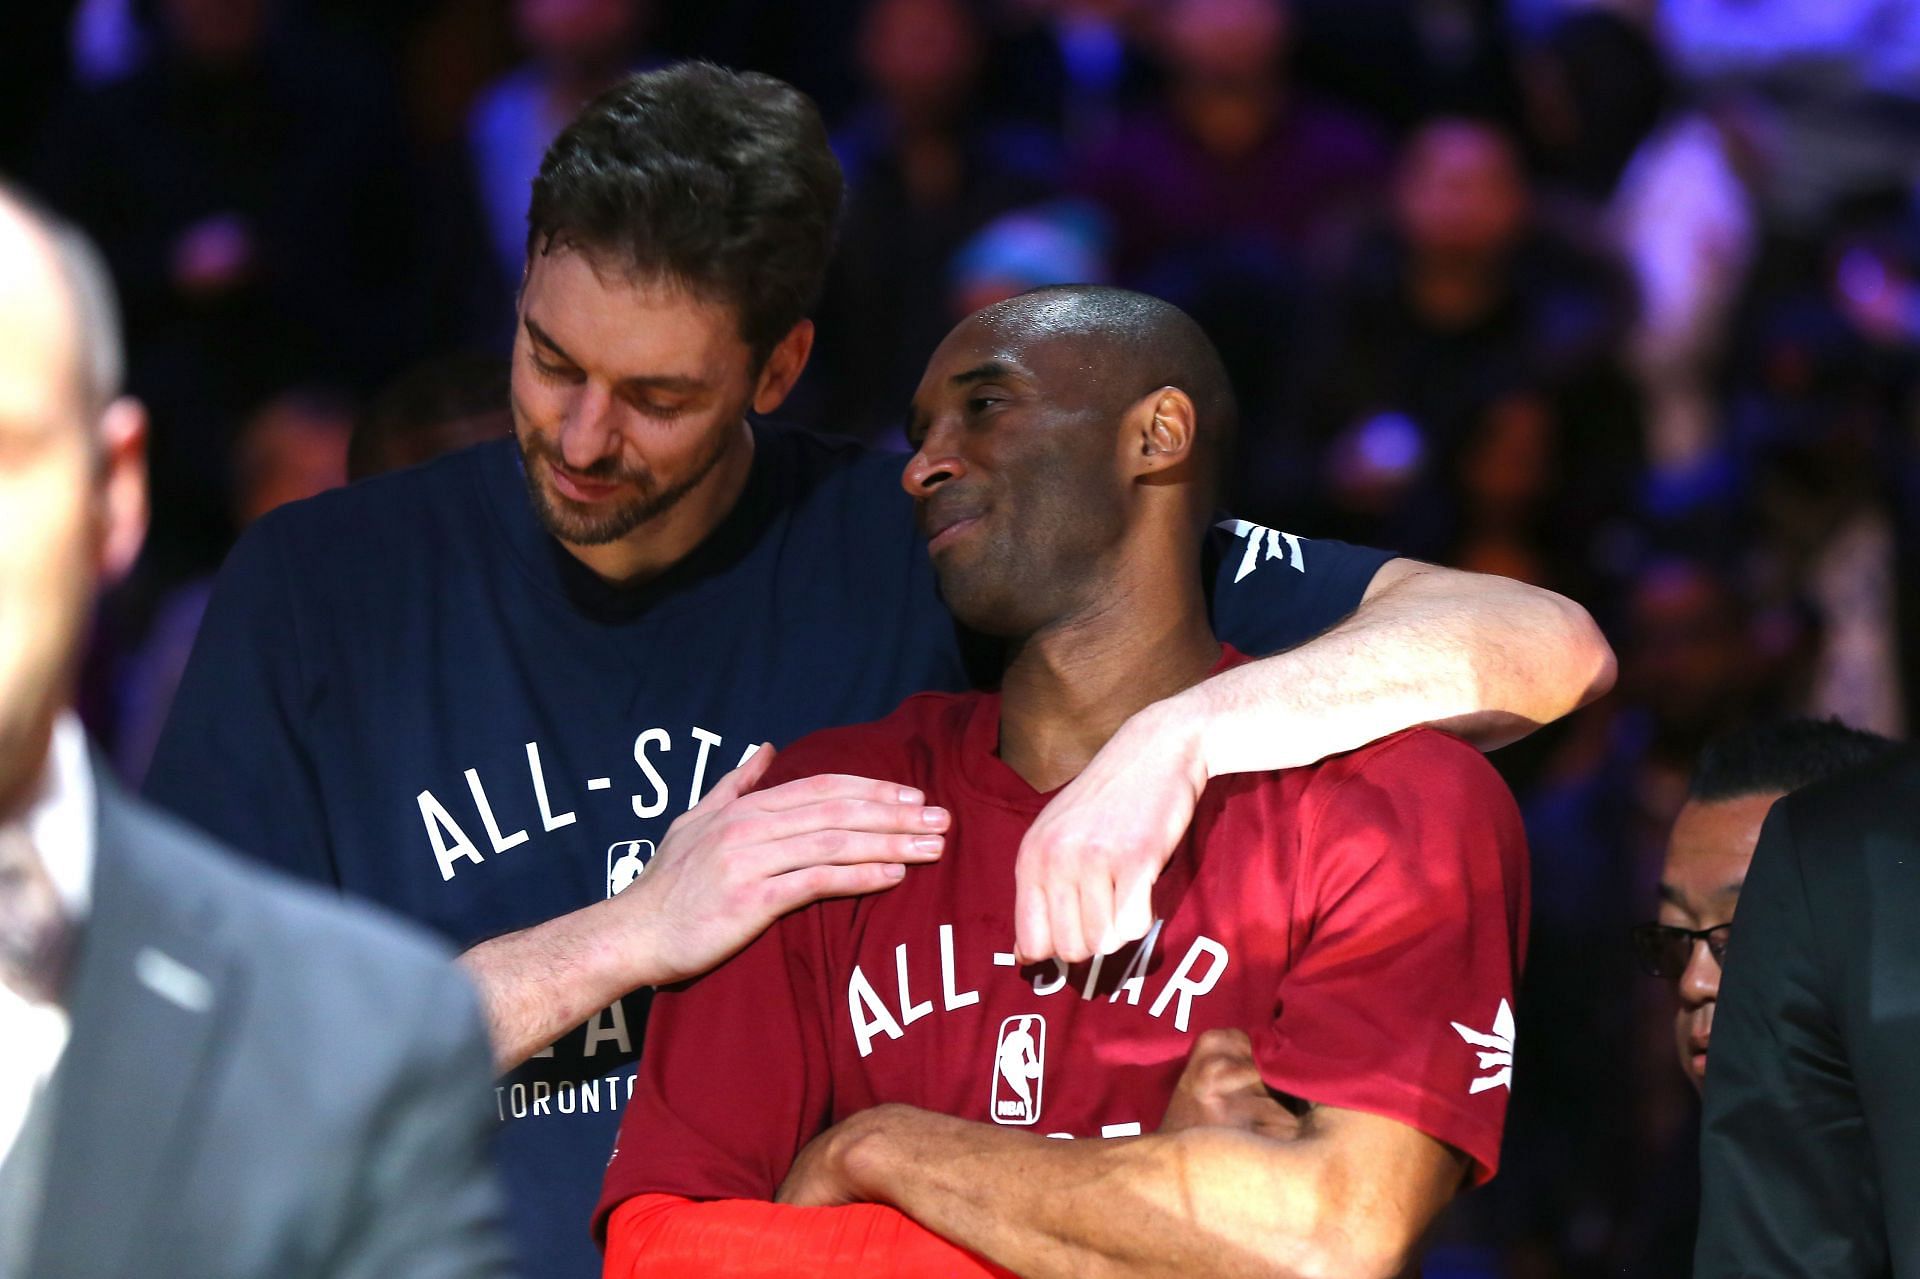 Pau Gasol reflects on Kobe Bryant, his legacy on and off the court, more